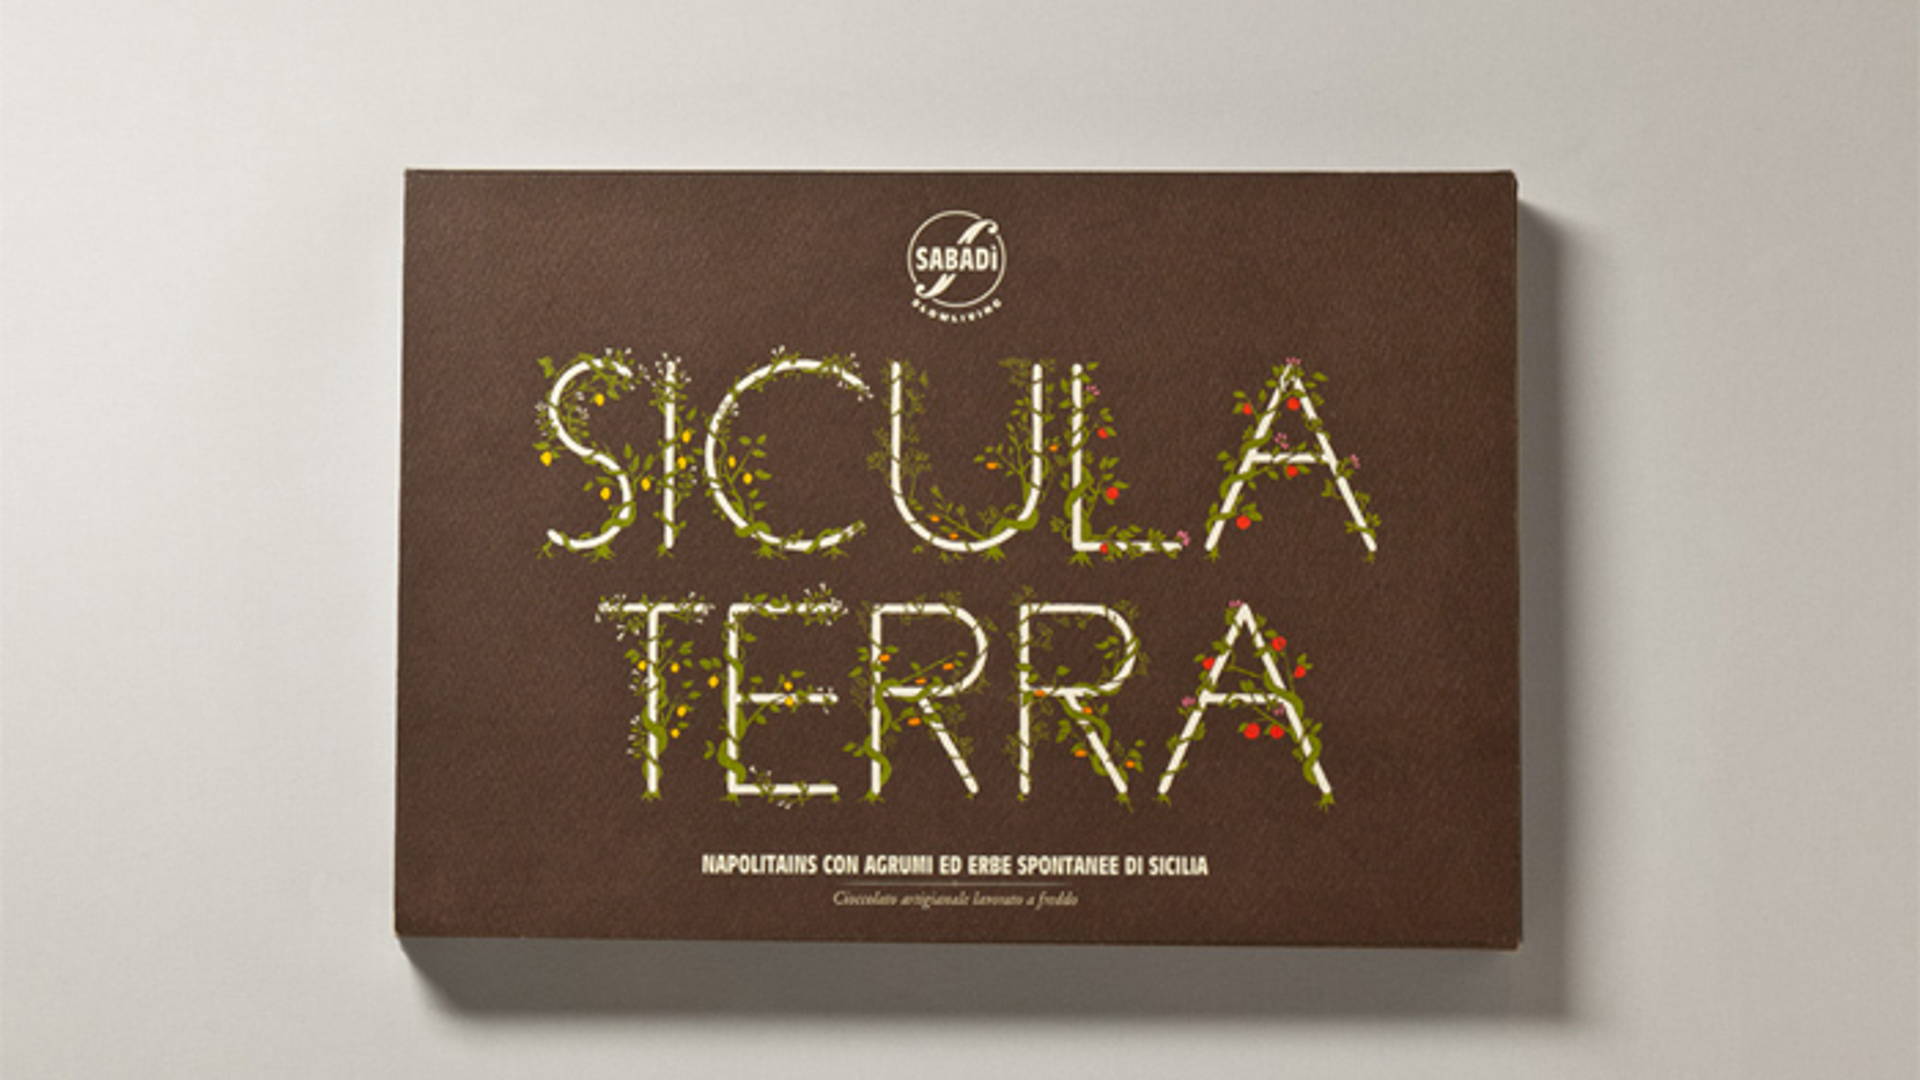 Featured image for Sabadì's Sicula Terra